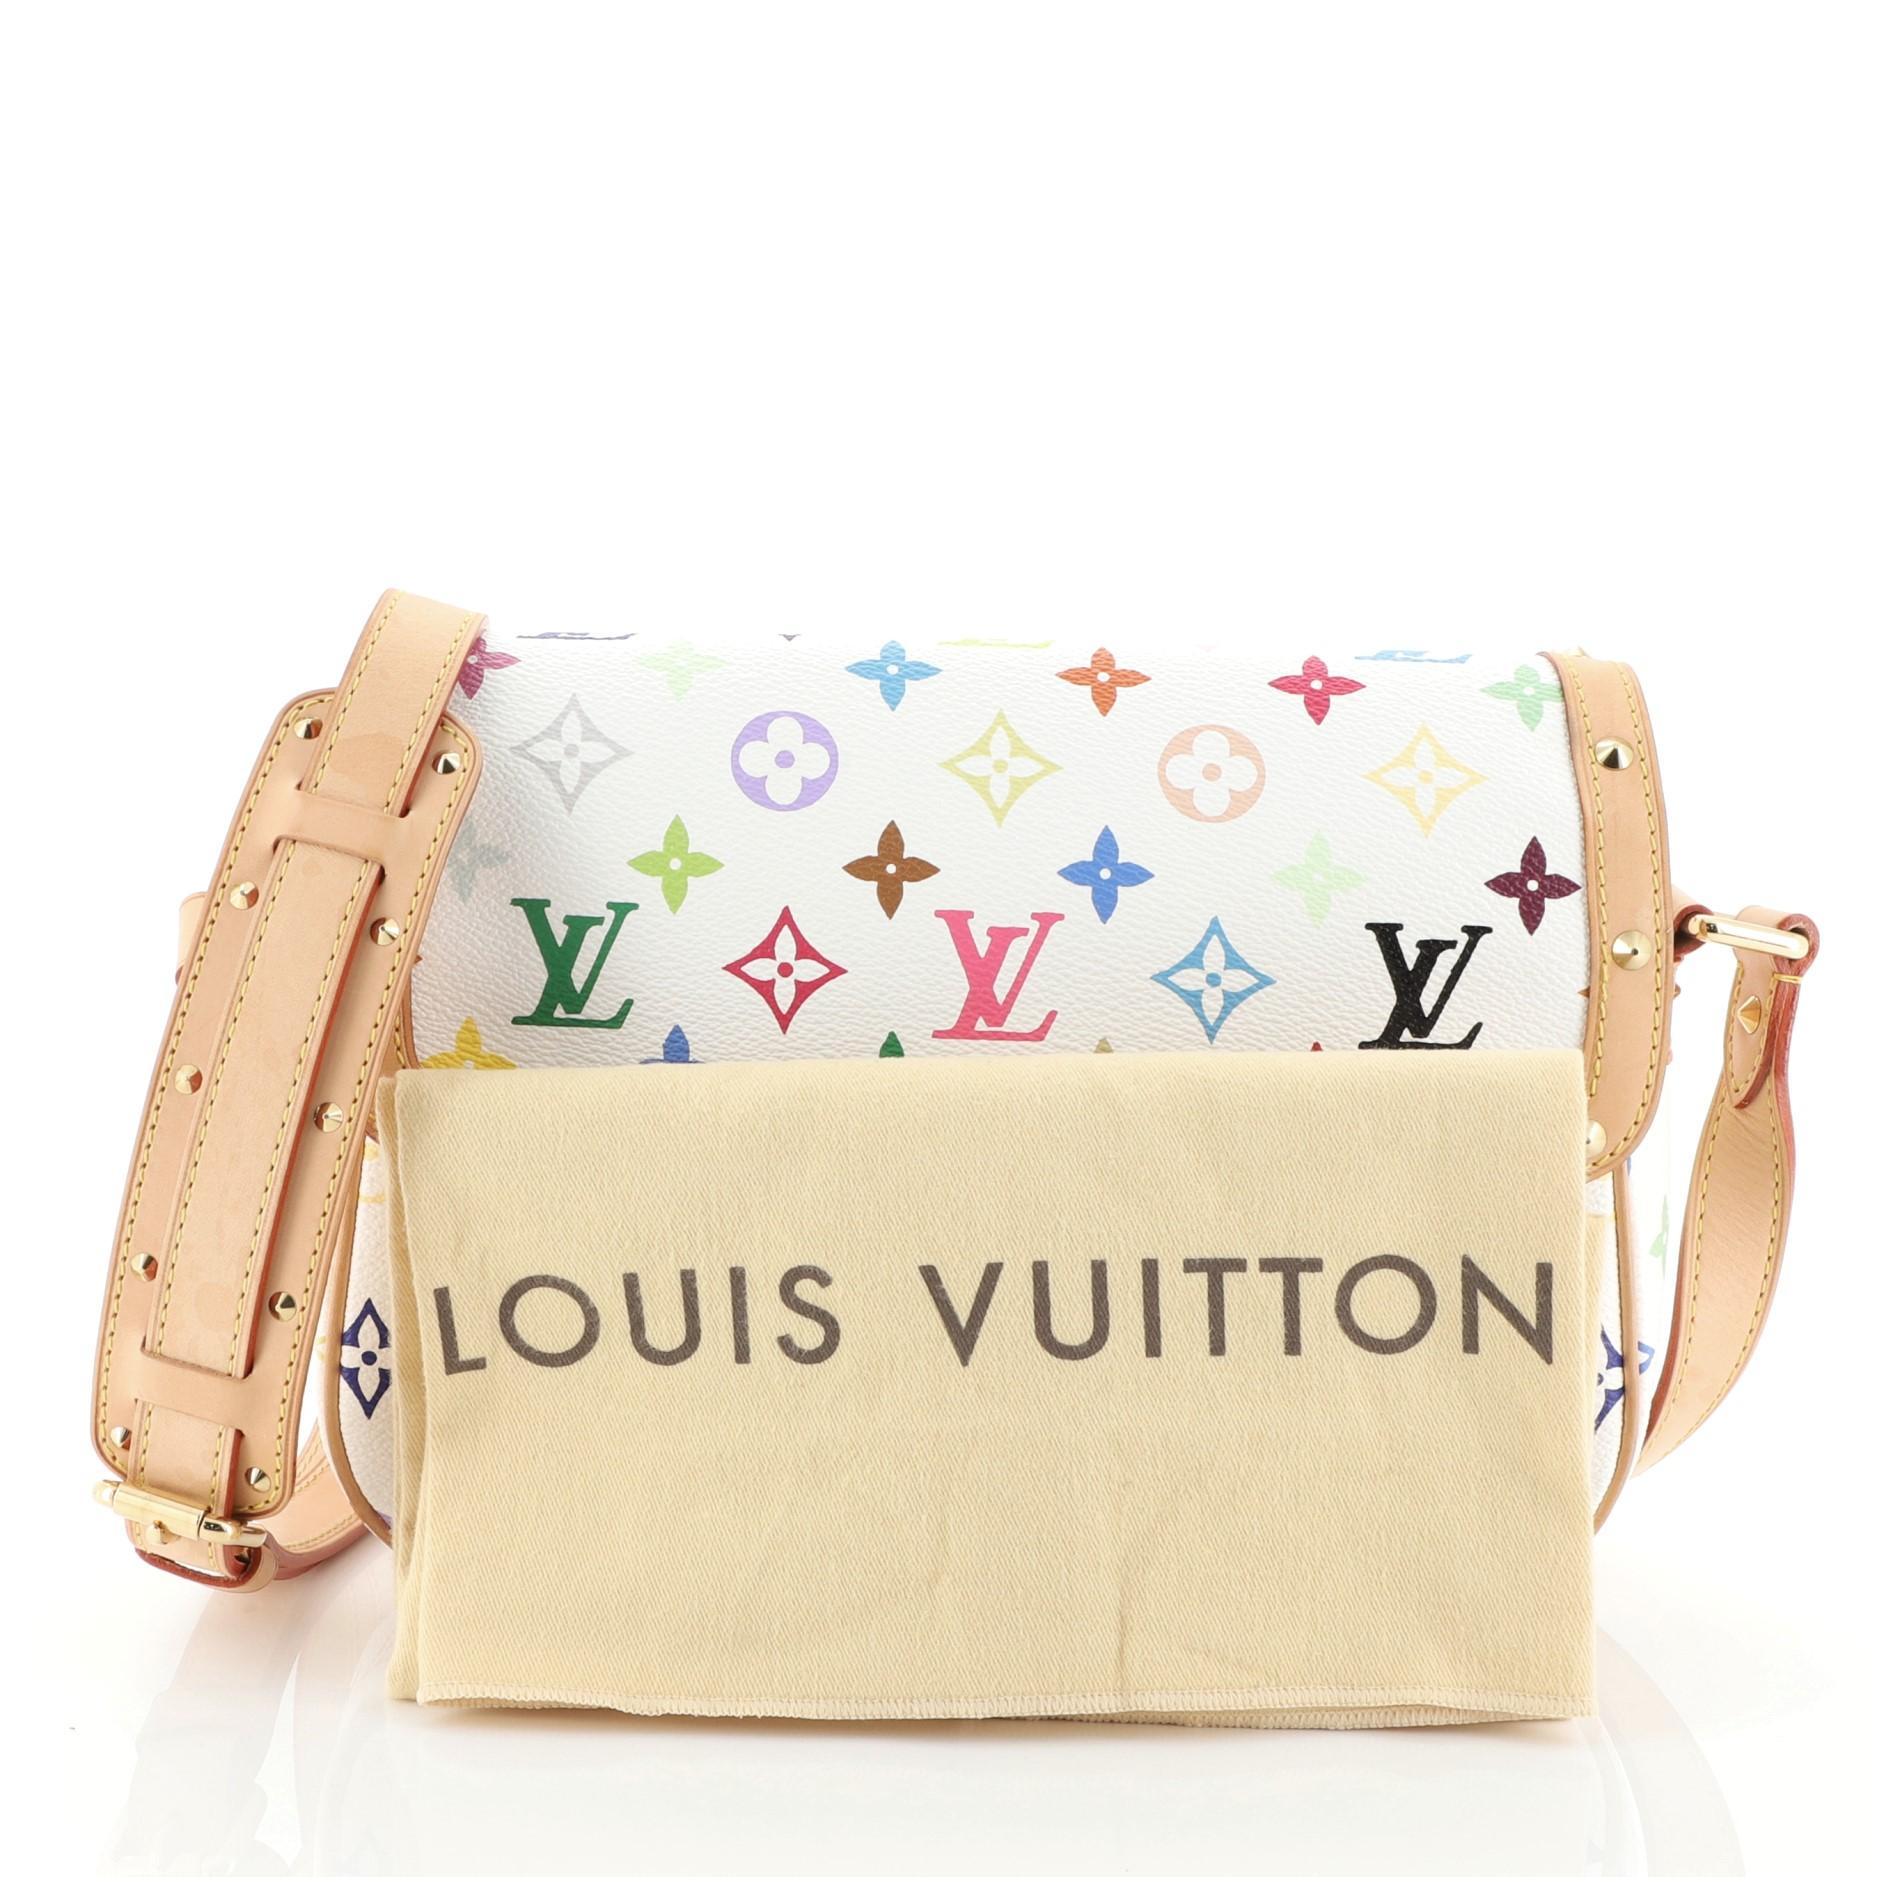 This Louis Vuitton Sologne Handbag Monogram Multicolor, crafted from white multicolor monogram coated canvas, features adjustable vachetta leather shoulder strap, studded flap details, natural cowhide leather trim, and gold-tone hardware. Its